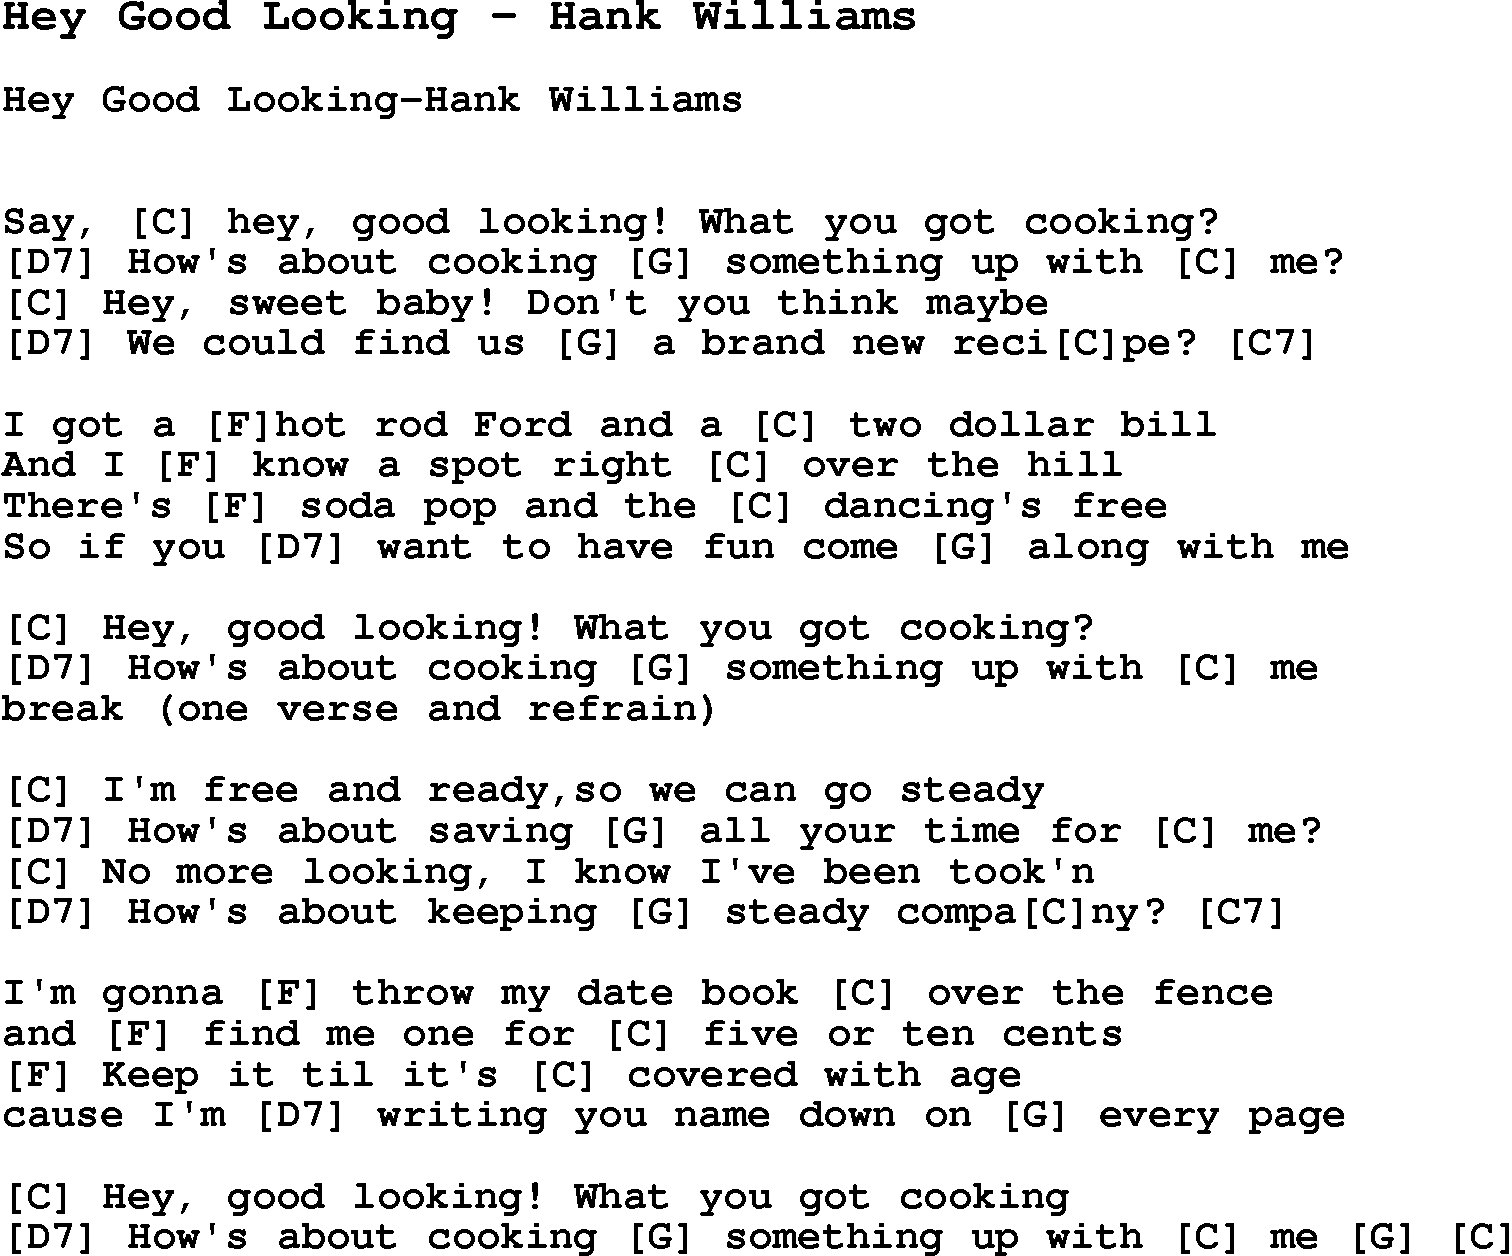 Song Hey Good Looking By Hank Williams Lyric For Vocal.